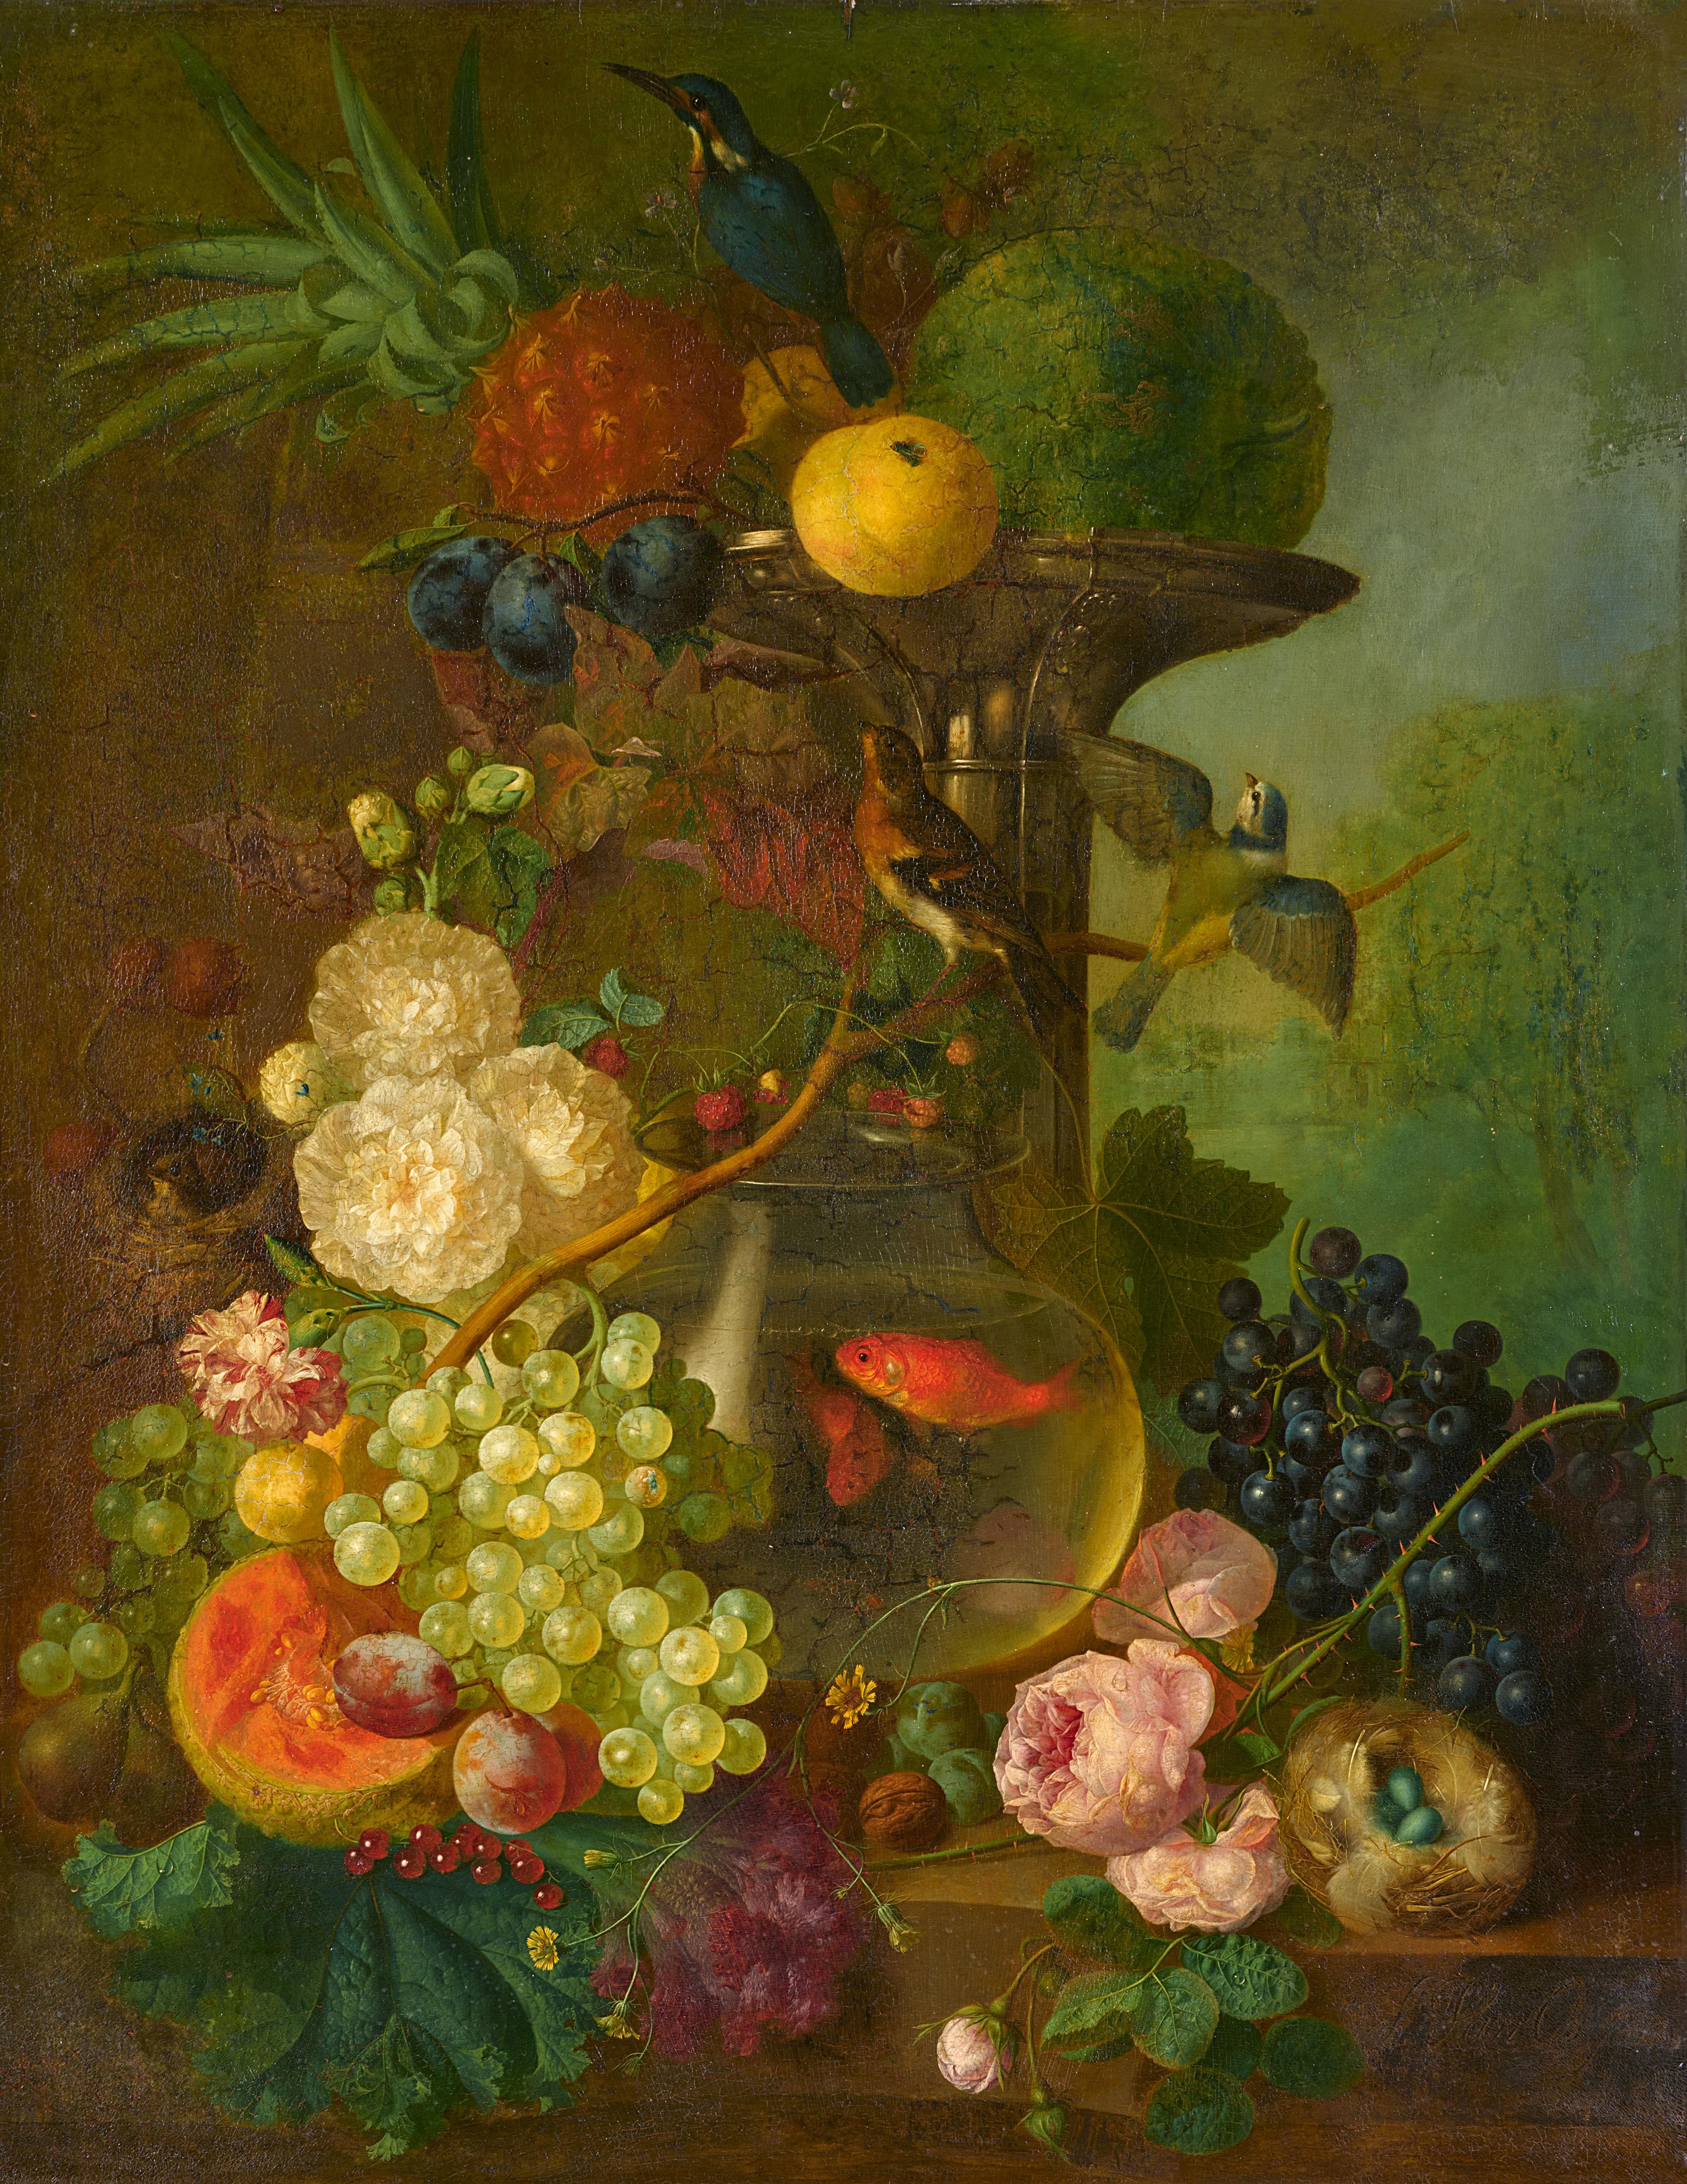 Jan van Os - Still Life with a Goldfish Bowl, Birds' Nests, Fruit and Flowers on a Stone Plinth - image-1